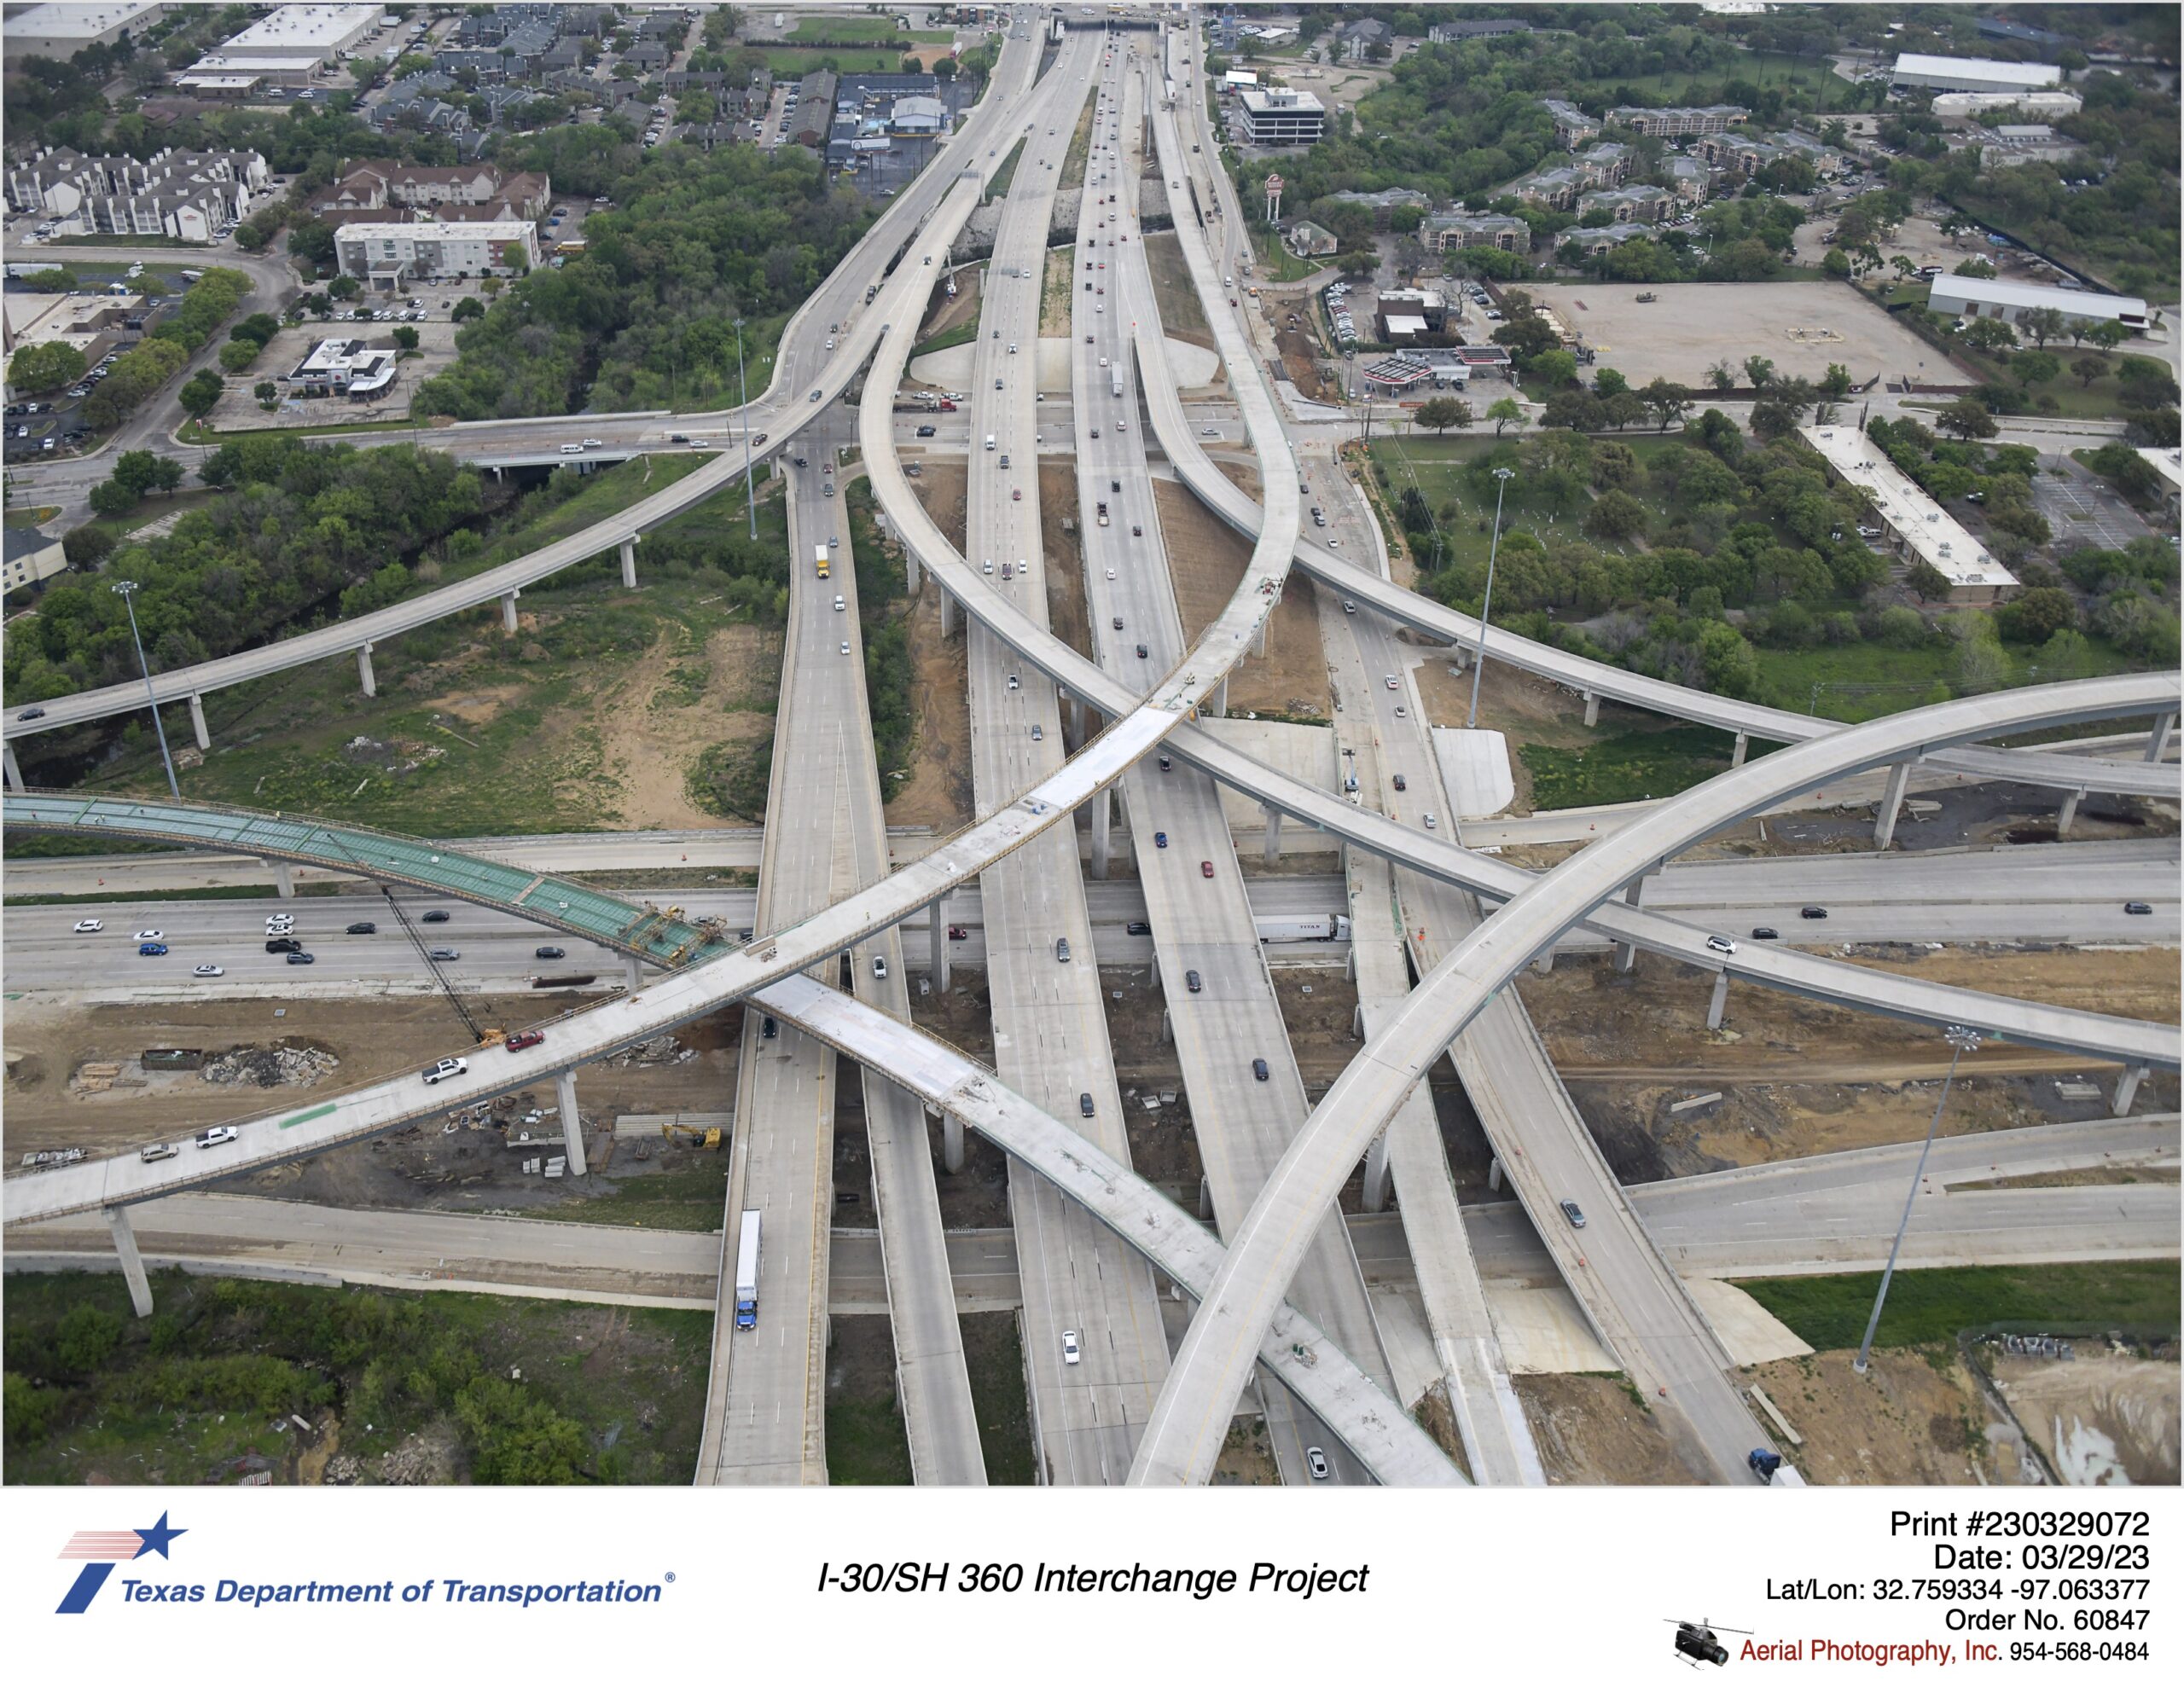 I-30 and SH 360 interchange looking north highlighting direct connector construction. March 2023.